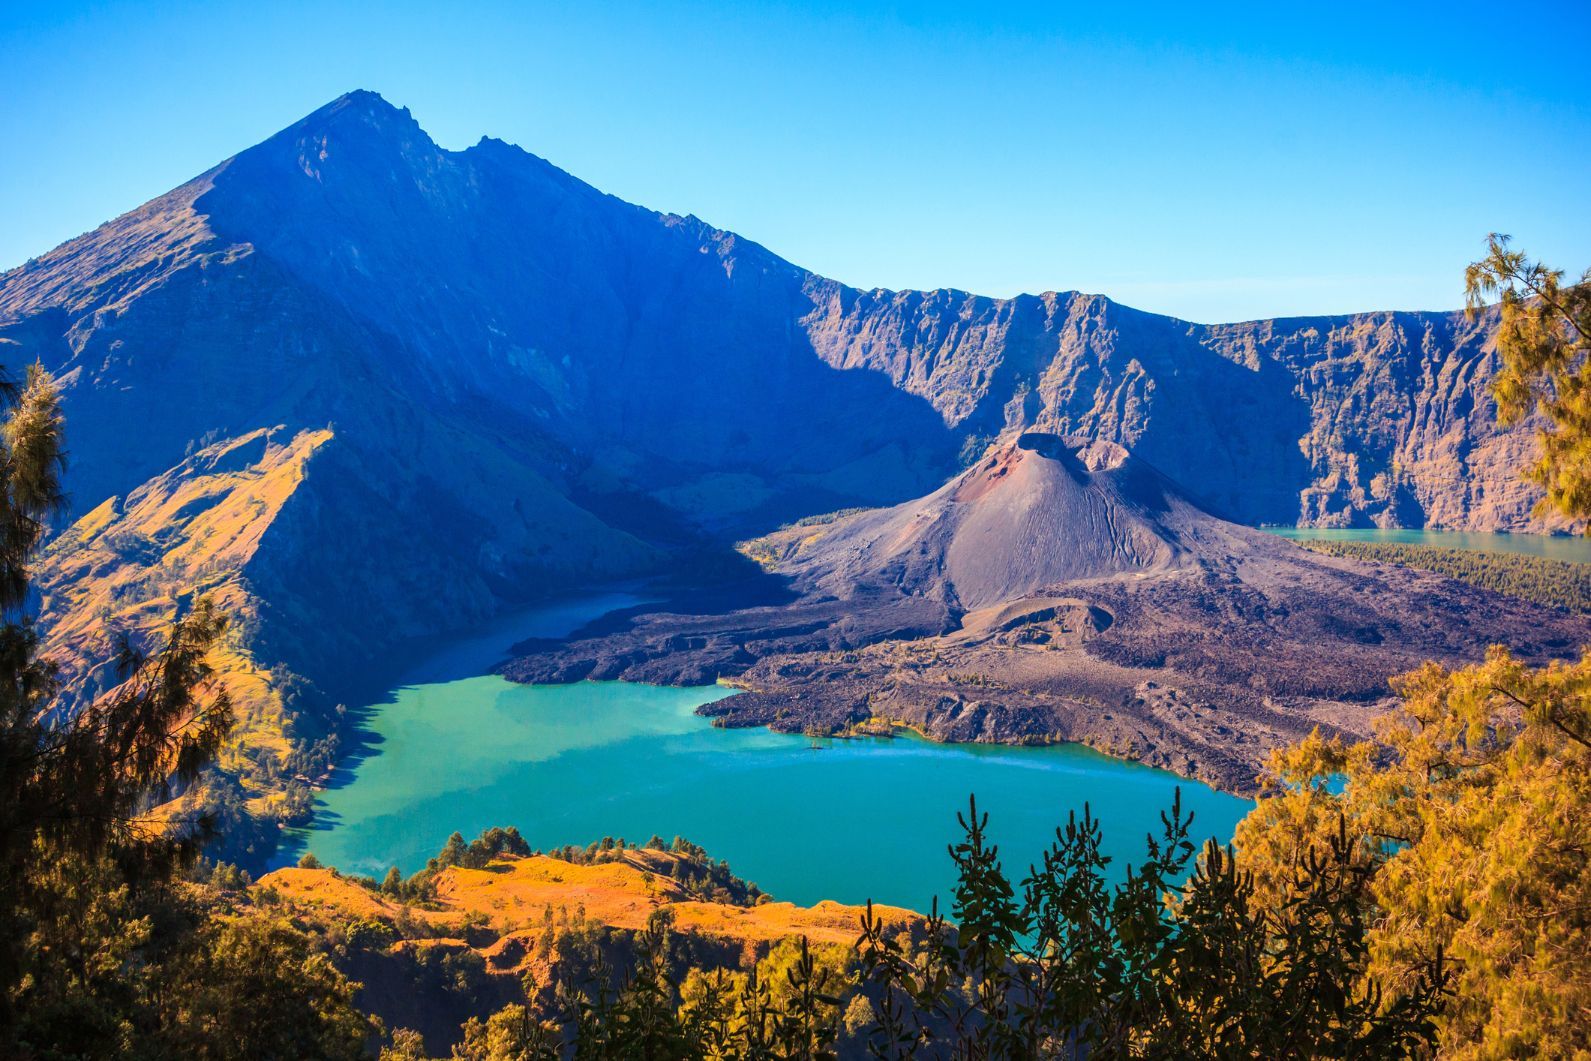 A view of Mount Rinjani, the second highest volcano in Indonesia.